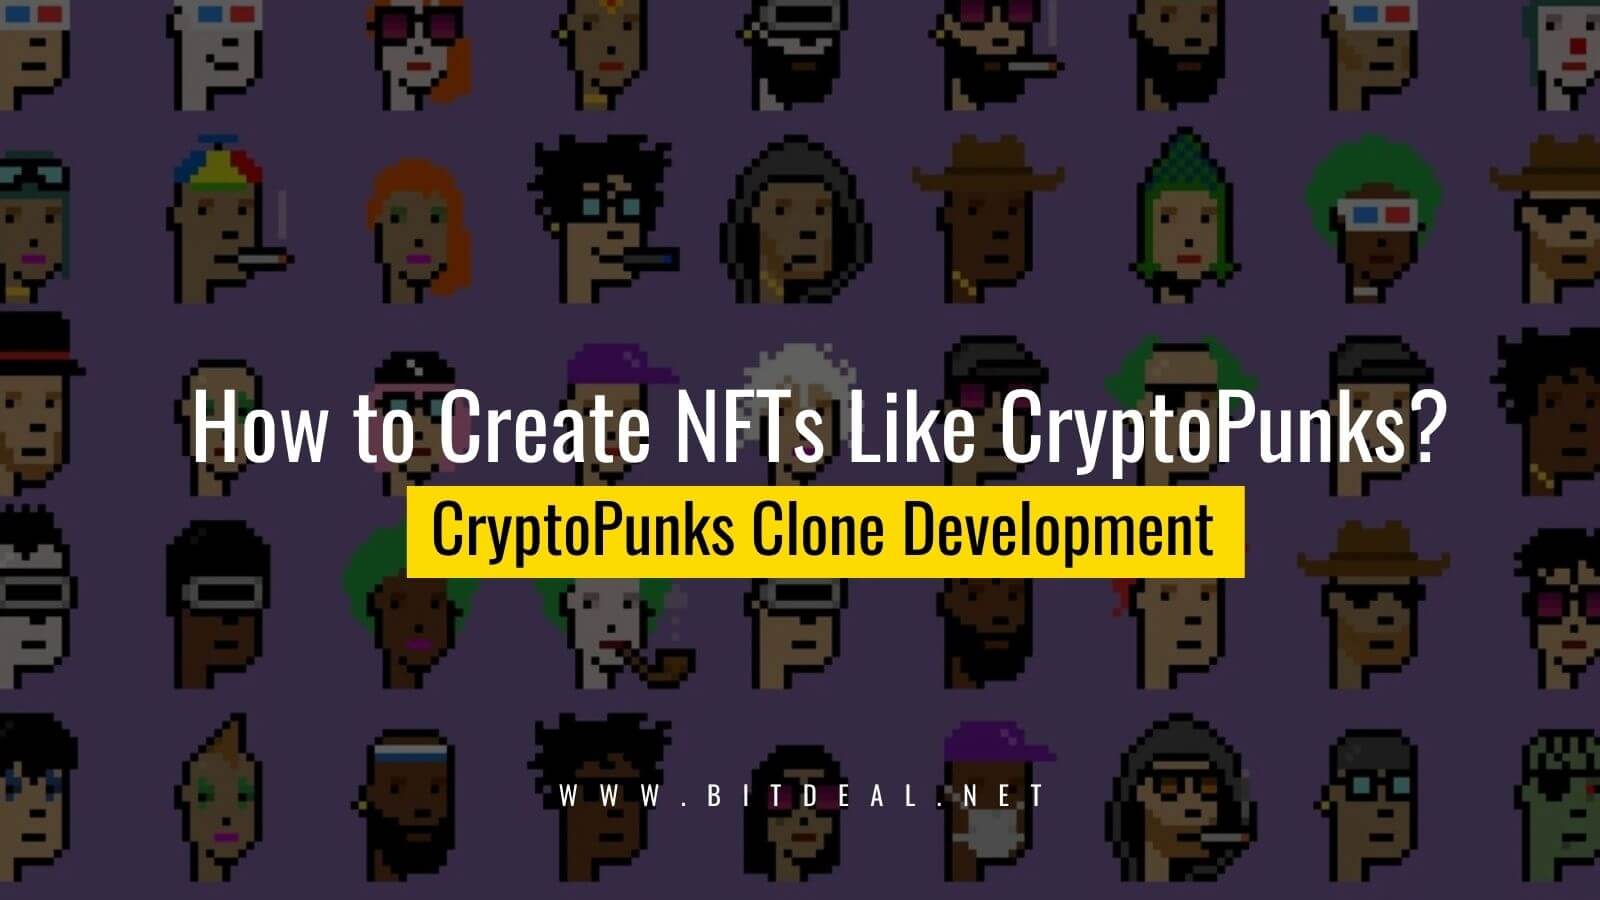 Article about Why to create NFTs like Cryptopunks